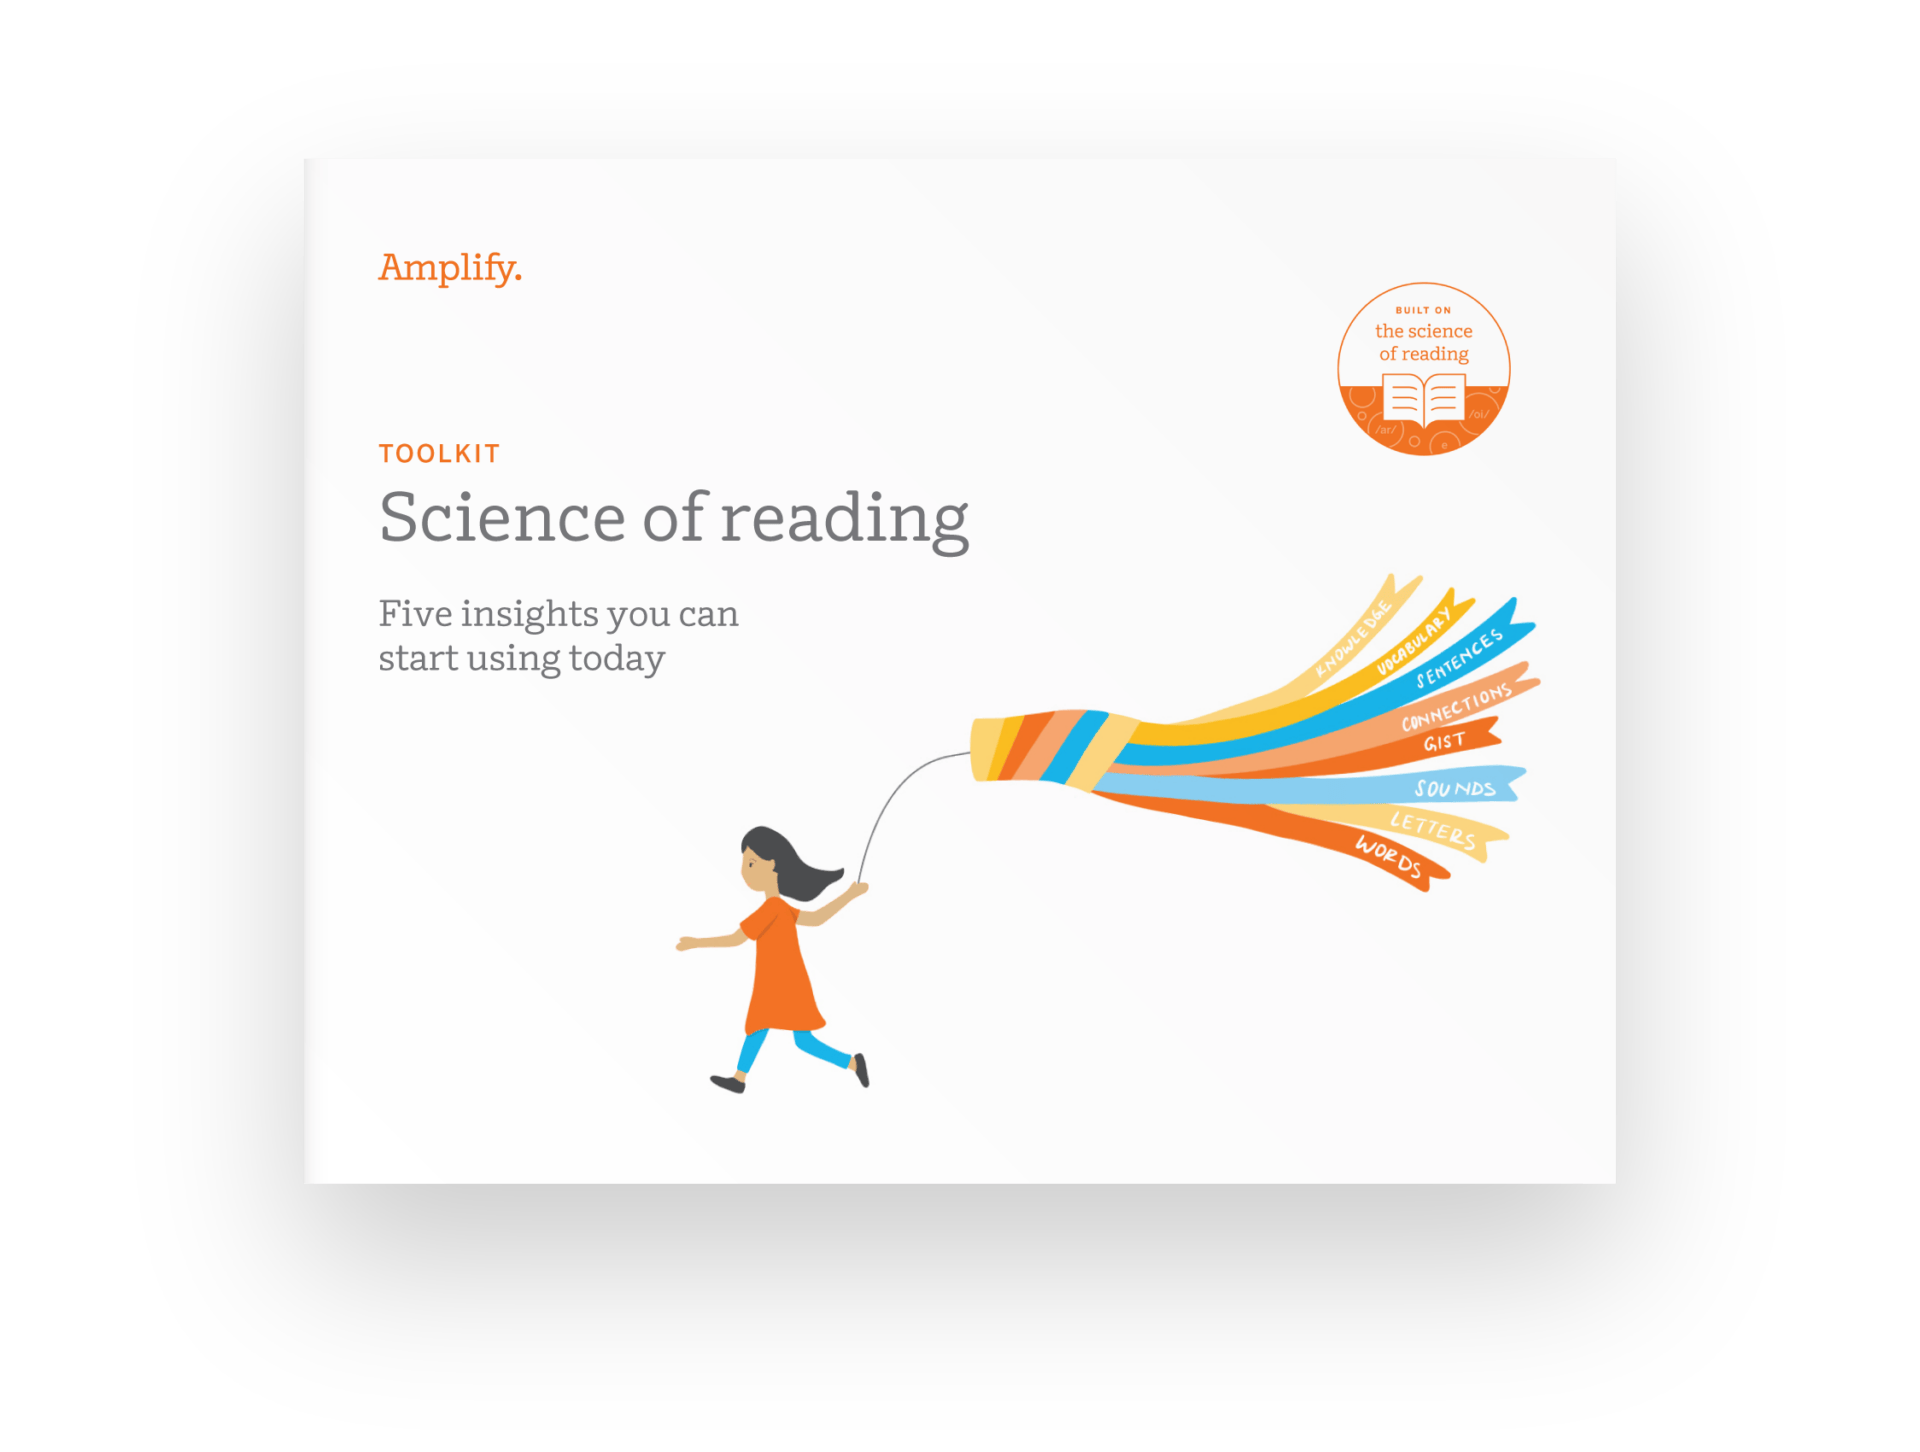 Illustration of a person holding a book with colorful ribbons flowing out, symbolizing streams of knowledge, alongside text about using science reading insights.